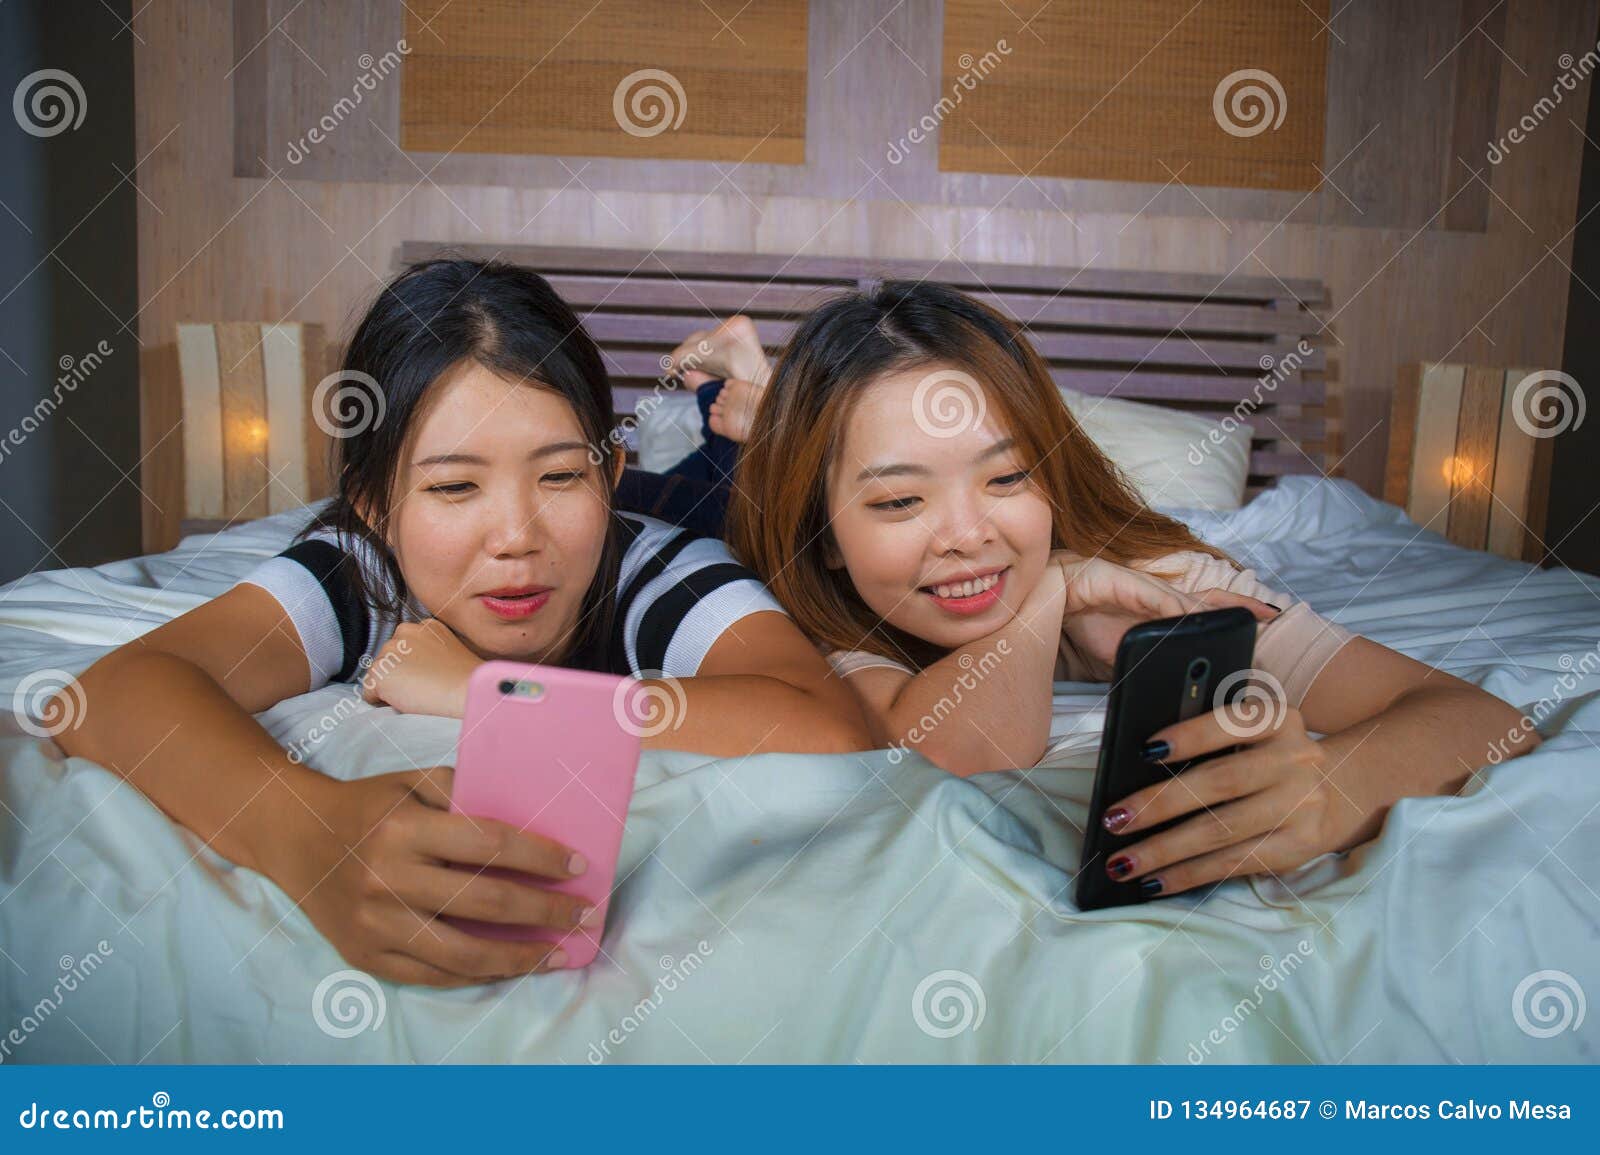 https://thumbs.dreamstime.com/z/two-young-happy-pretty-asian-chinese-girlfriends-sitting-home-bedroom-laughing-talking-having-fun-using-internet-social-134964687.jpg